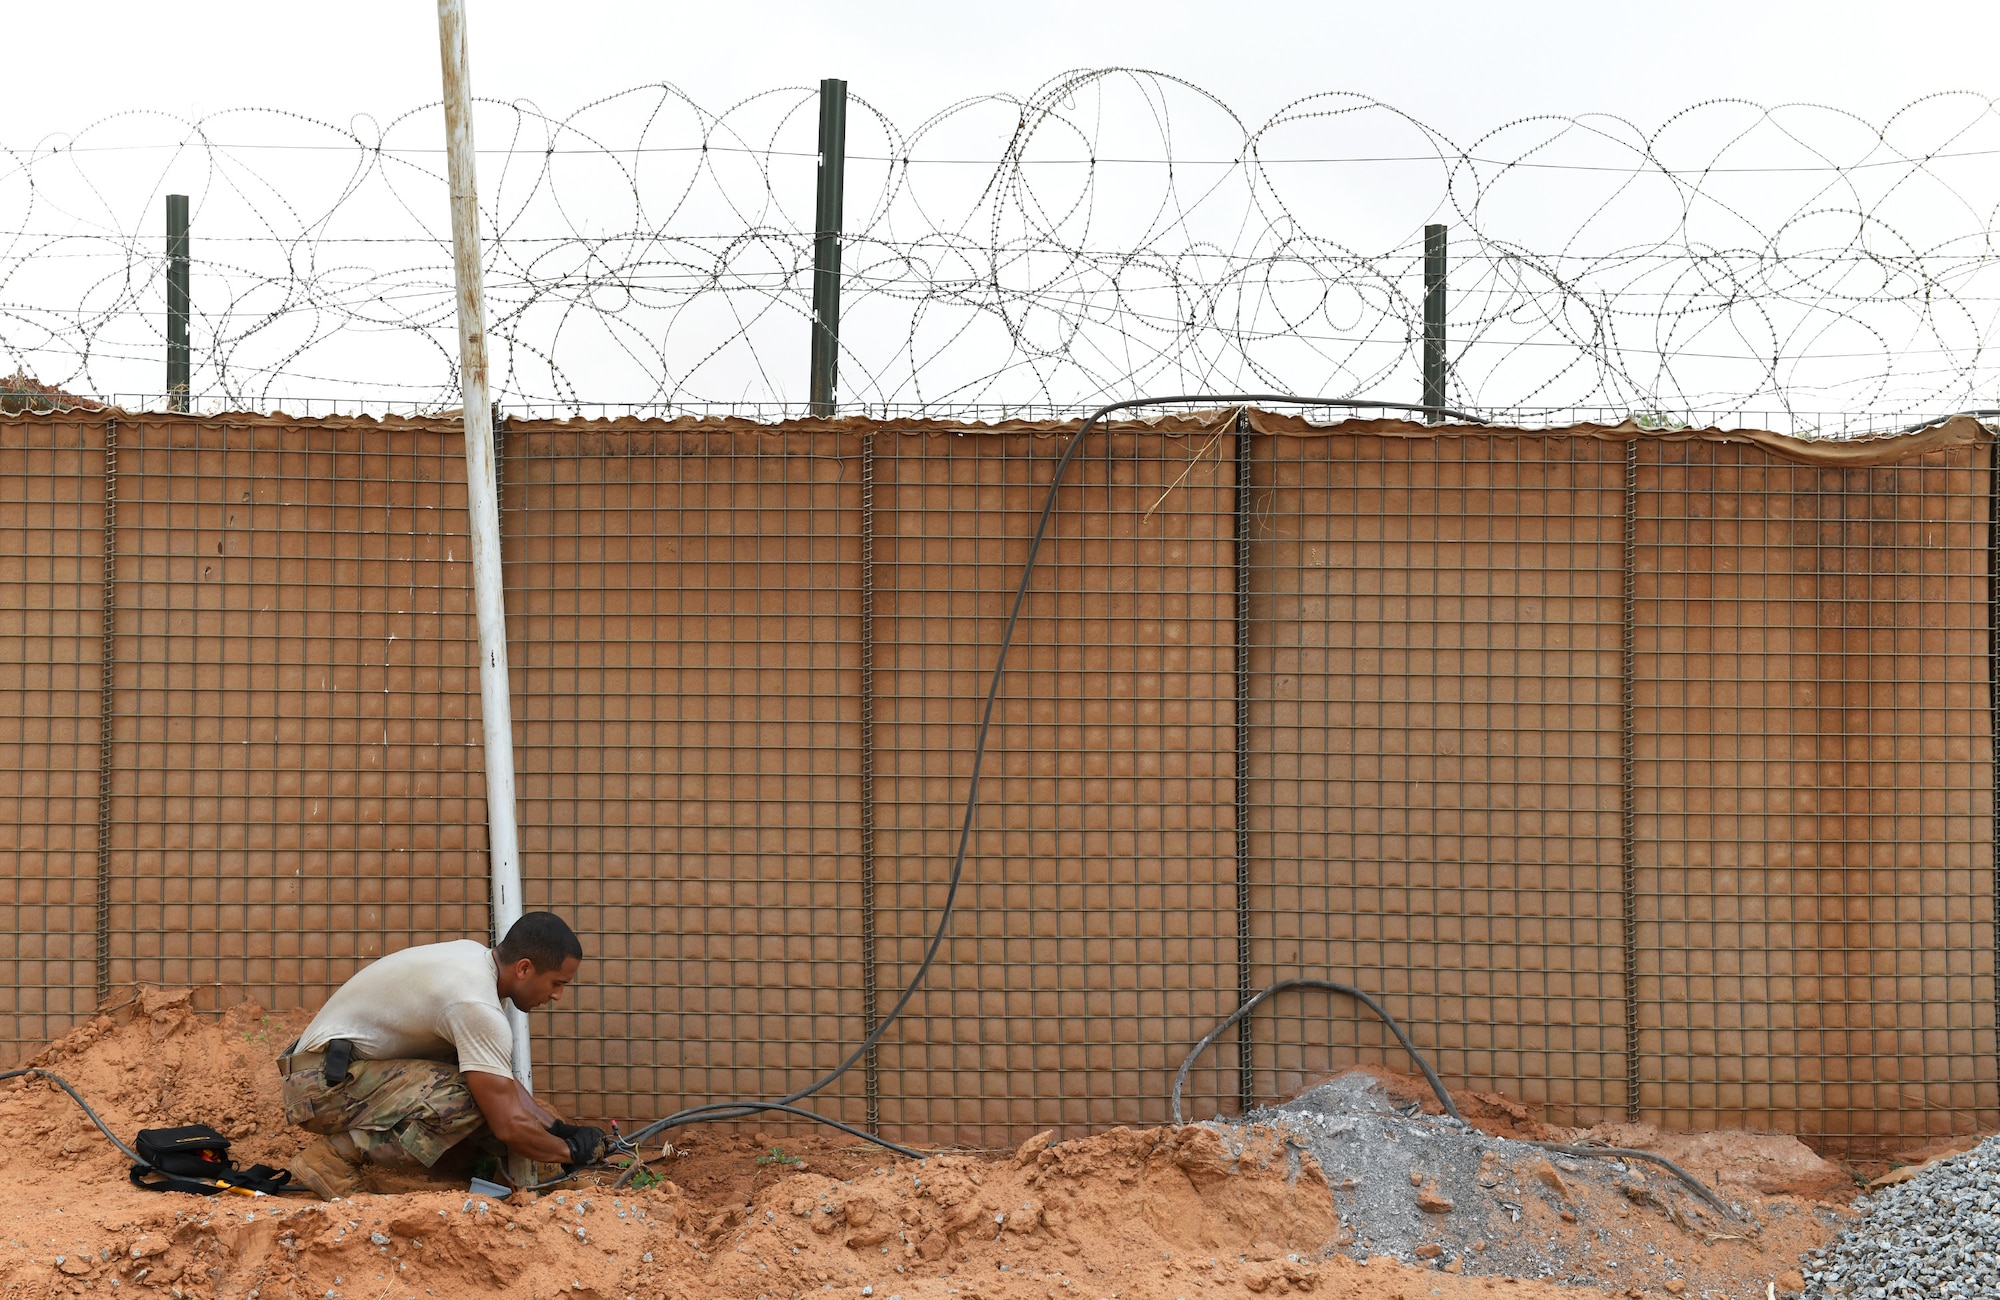 U.S. Air Force Tech. Sgt. Guillermo Cajigas, 768th Expeditionary Air Base Squadron Power Production and Electrical Systems section lead, connects a new cable for perimeter lighting at Nigerien Air Base 101, Niamey, Niger, Oct. 10, 2019. The cable was rerouted to make way for the foundation of the base’s new gym facilities. (U.S. Air Force photo by Staff Sgt. Alex Fox Echols III)